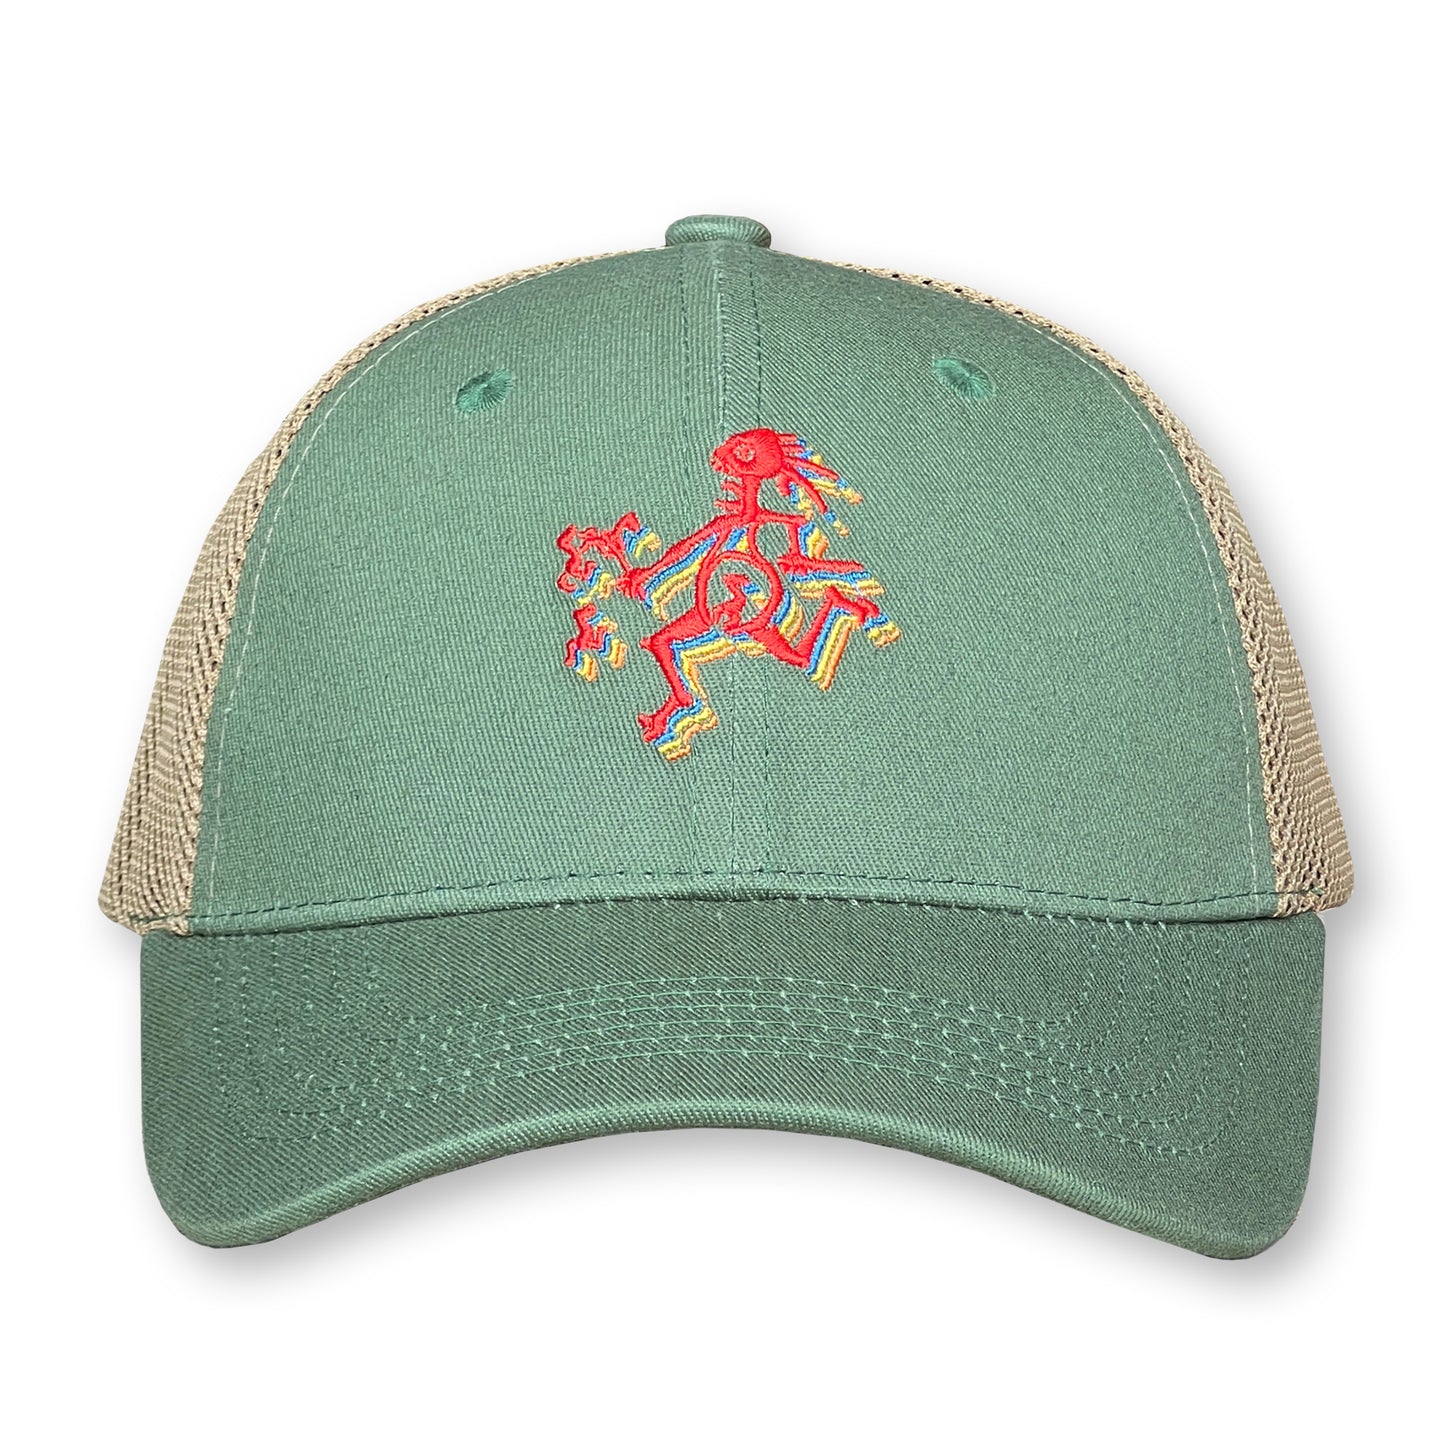 Widespread Panic Trucker Hat / Fern Cotton with Oat Mesh and Crawfish Note Eater